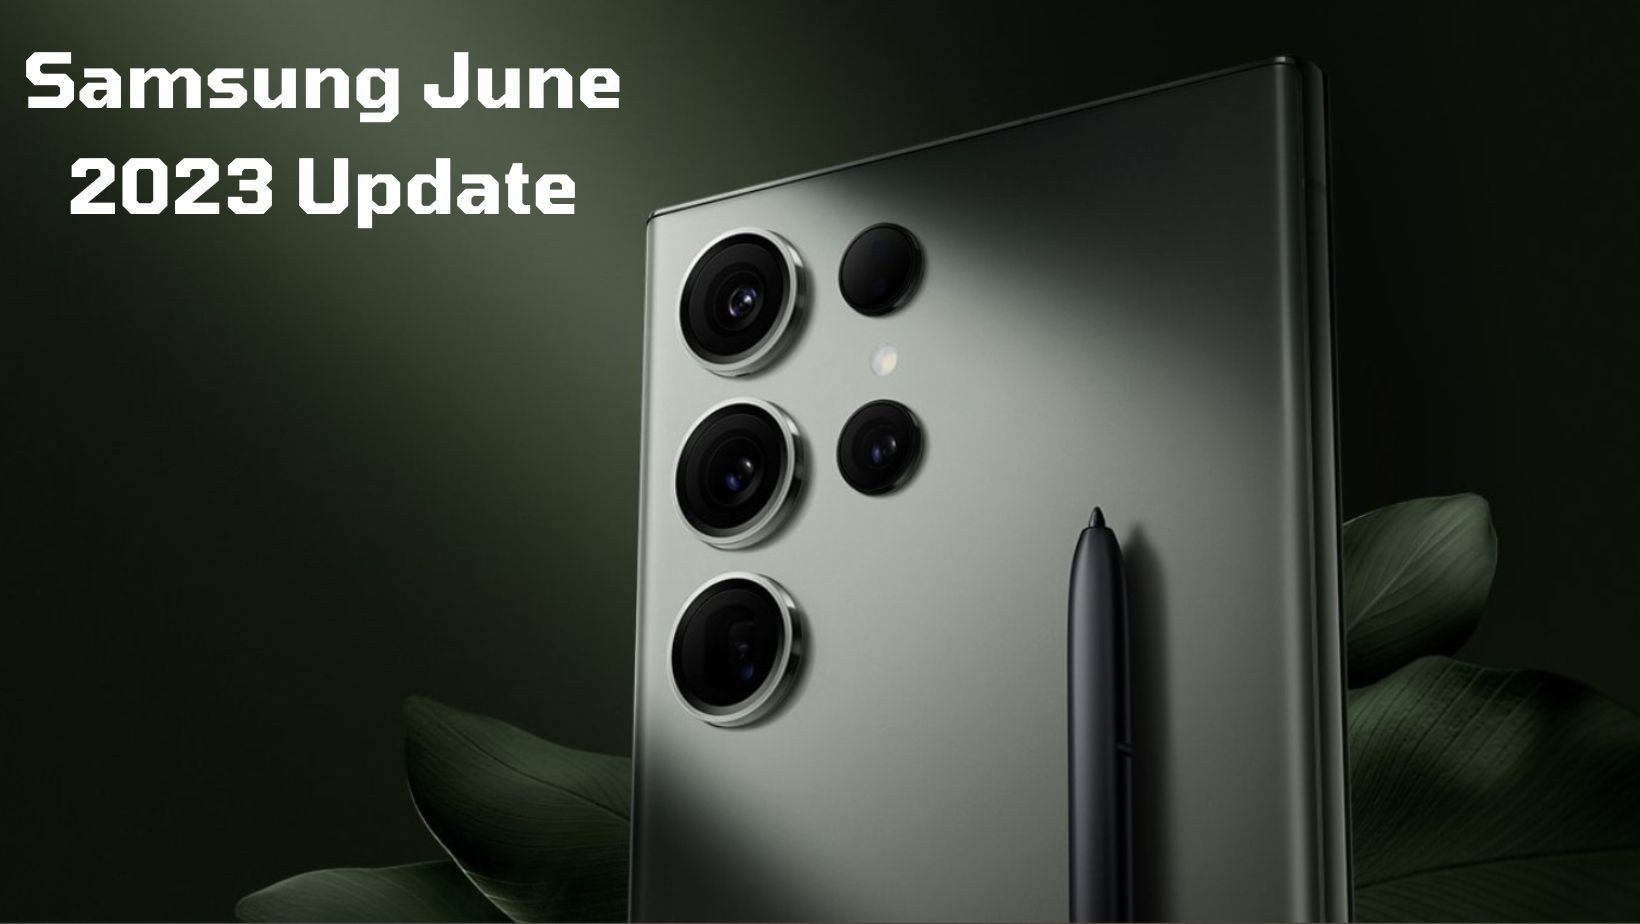 Huge Samsung June 2023 update with major camera and gallery upgrades